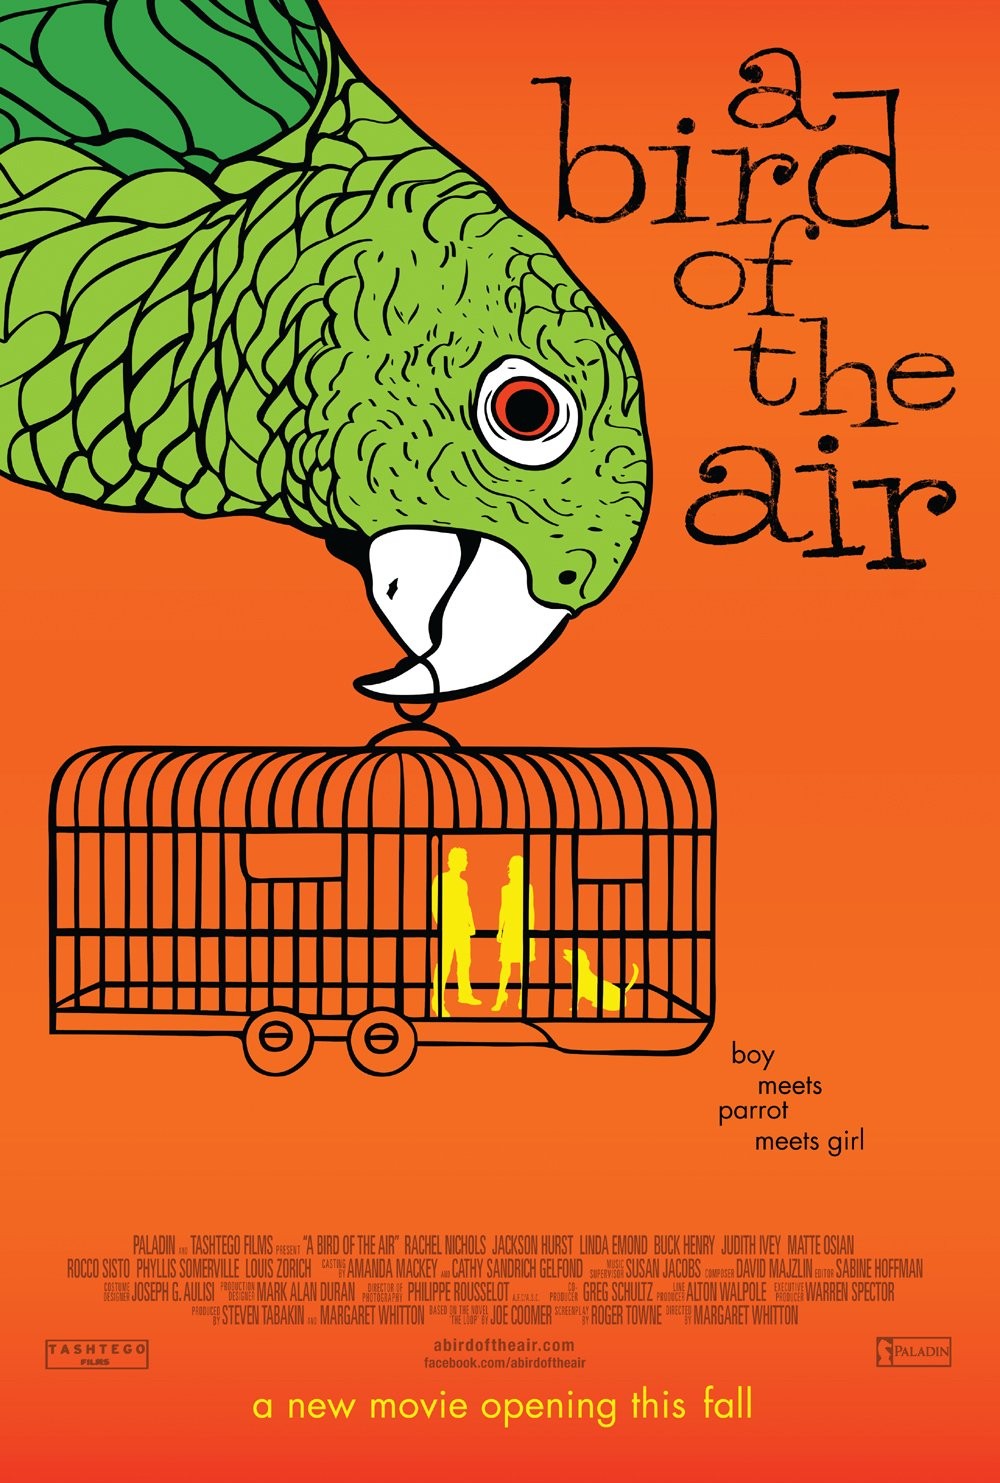 Poster of Paladin's A Bird of the Air (2011)